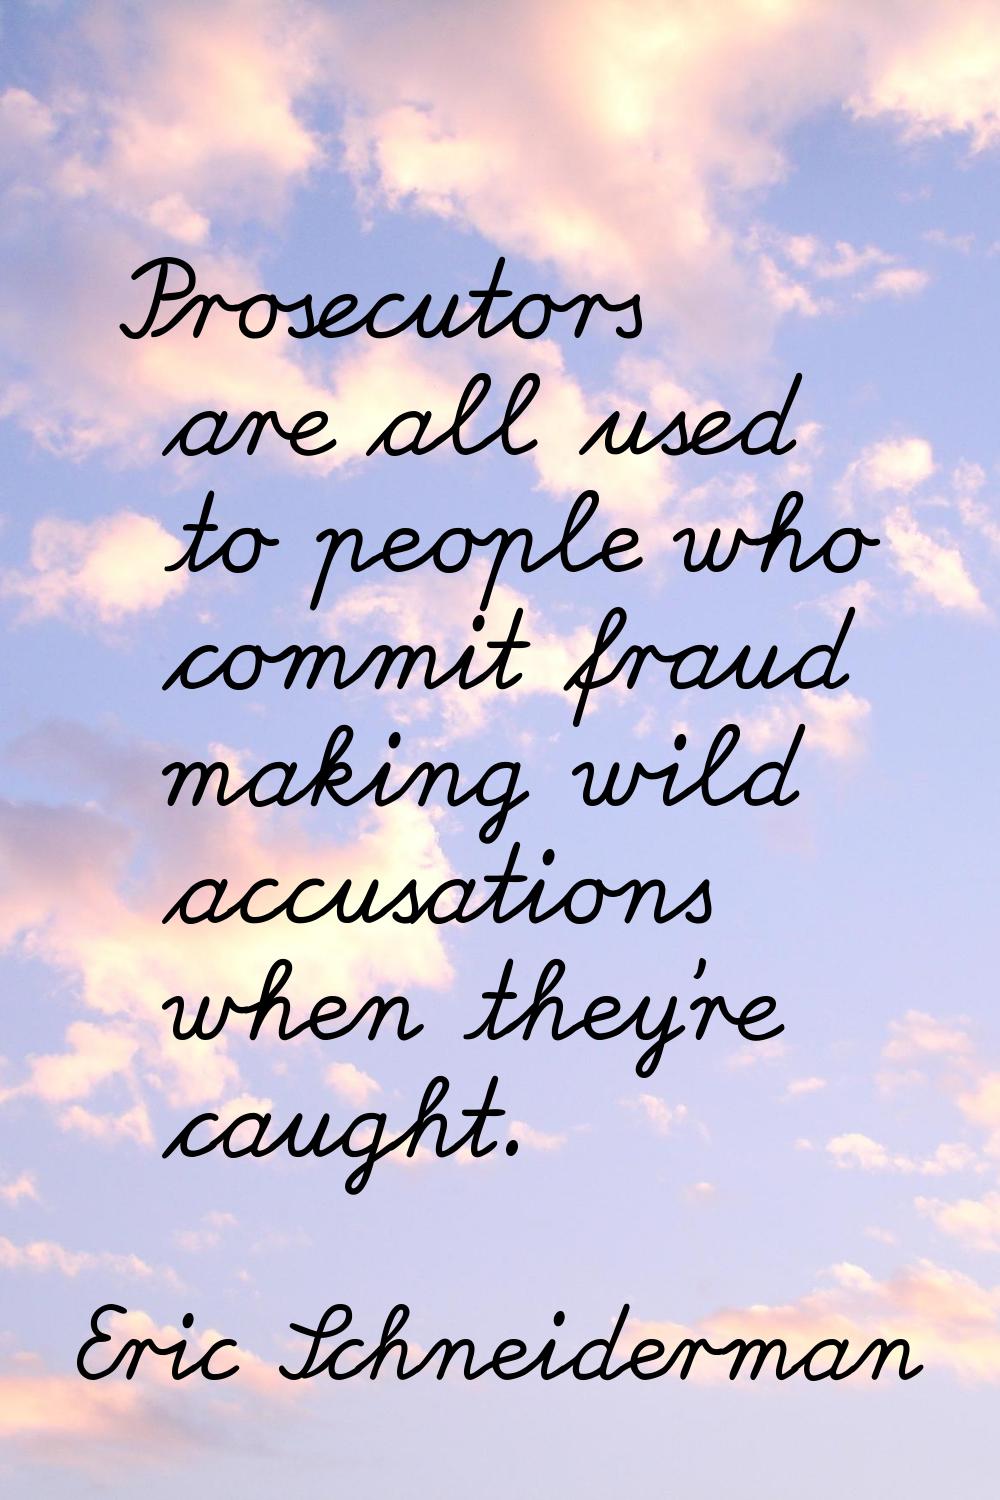 Prosecutors are all used to people who commit fraud making wild accusations when they're caught.